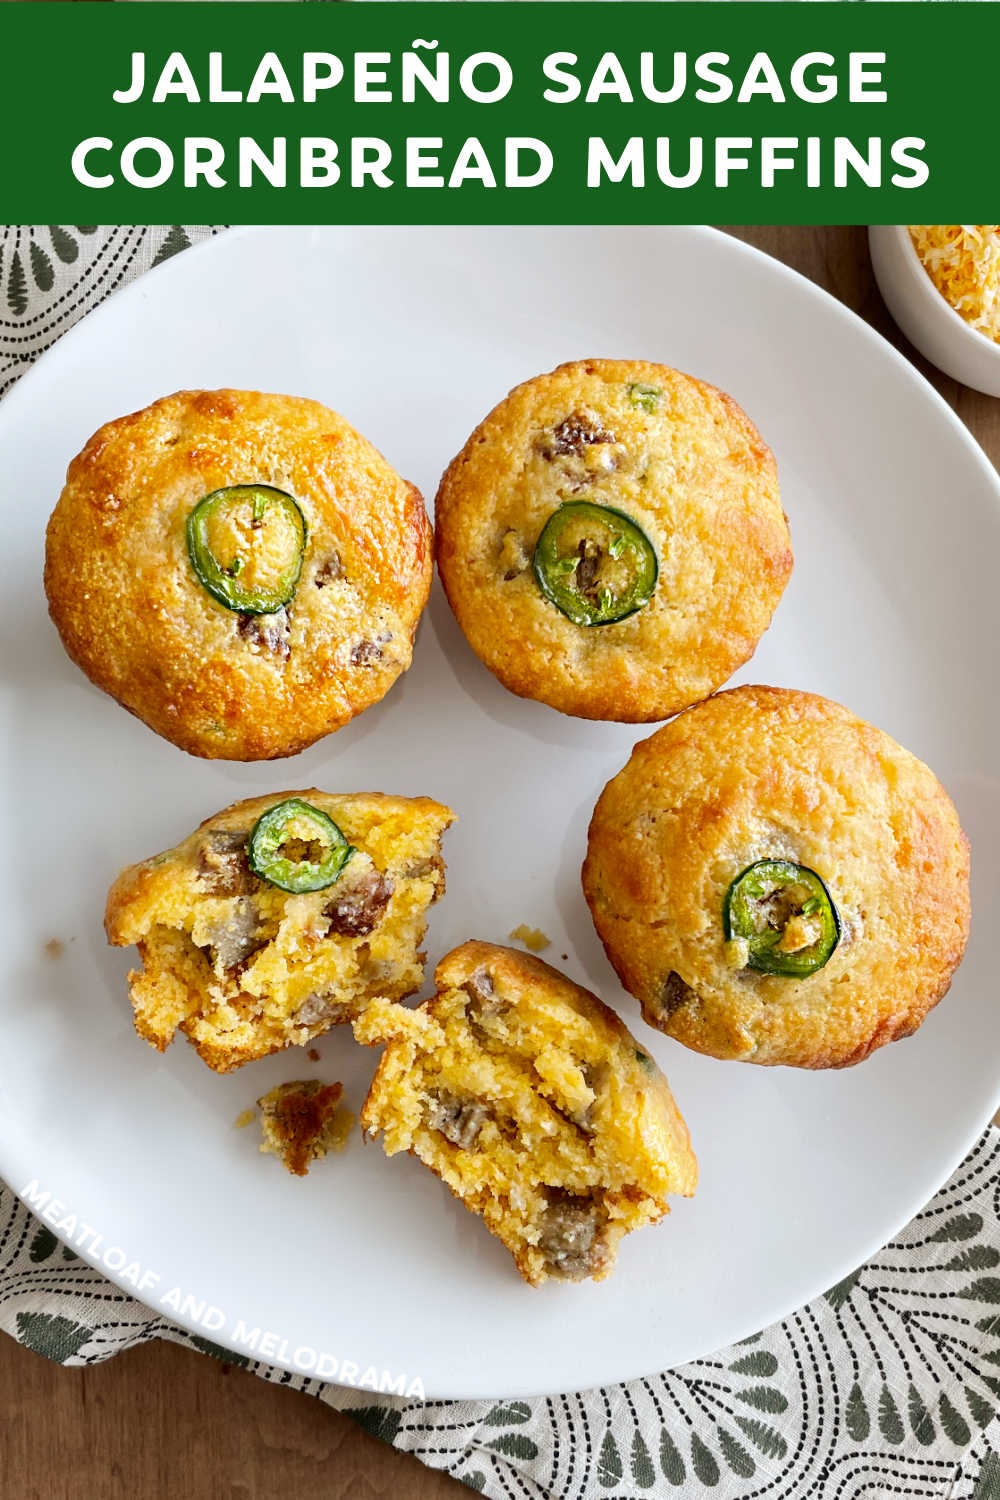 Jalapeño Sausage Cornbread Muffins made with Jiffy mix and cheddar cheese are sweet spicy and delicious. You'll love this easy muffin recipe for breakfast, brunch or as the perfect accompaniment to your favorite soup and chili recipes! via @meamel